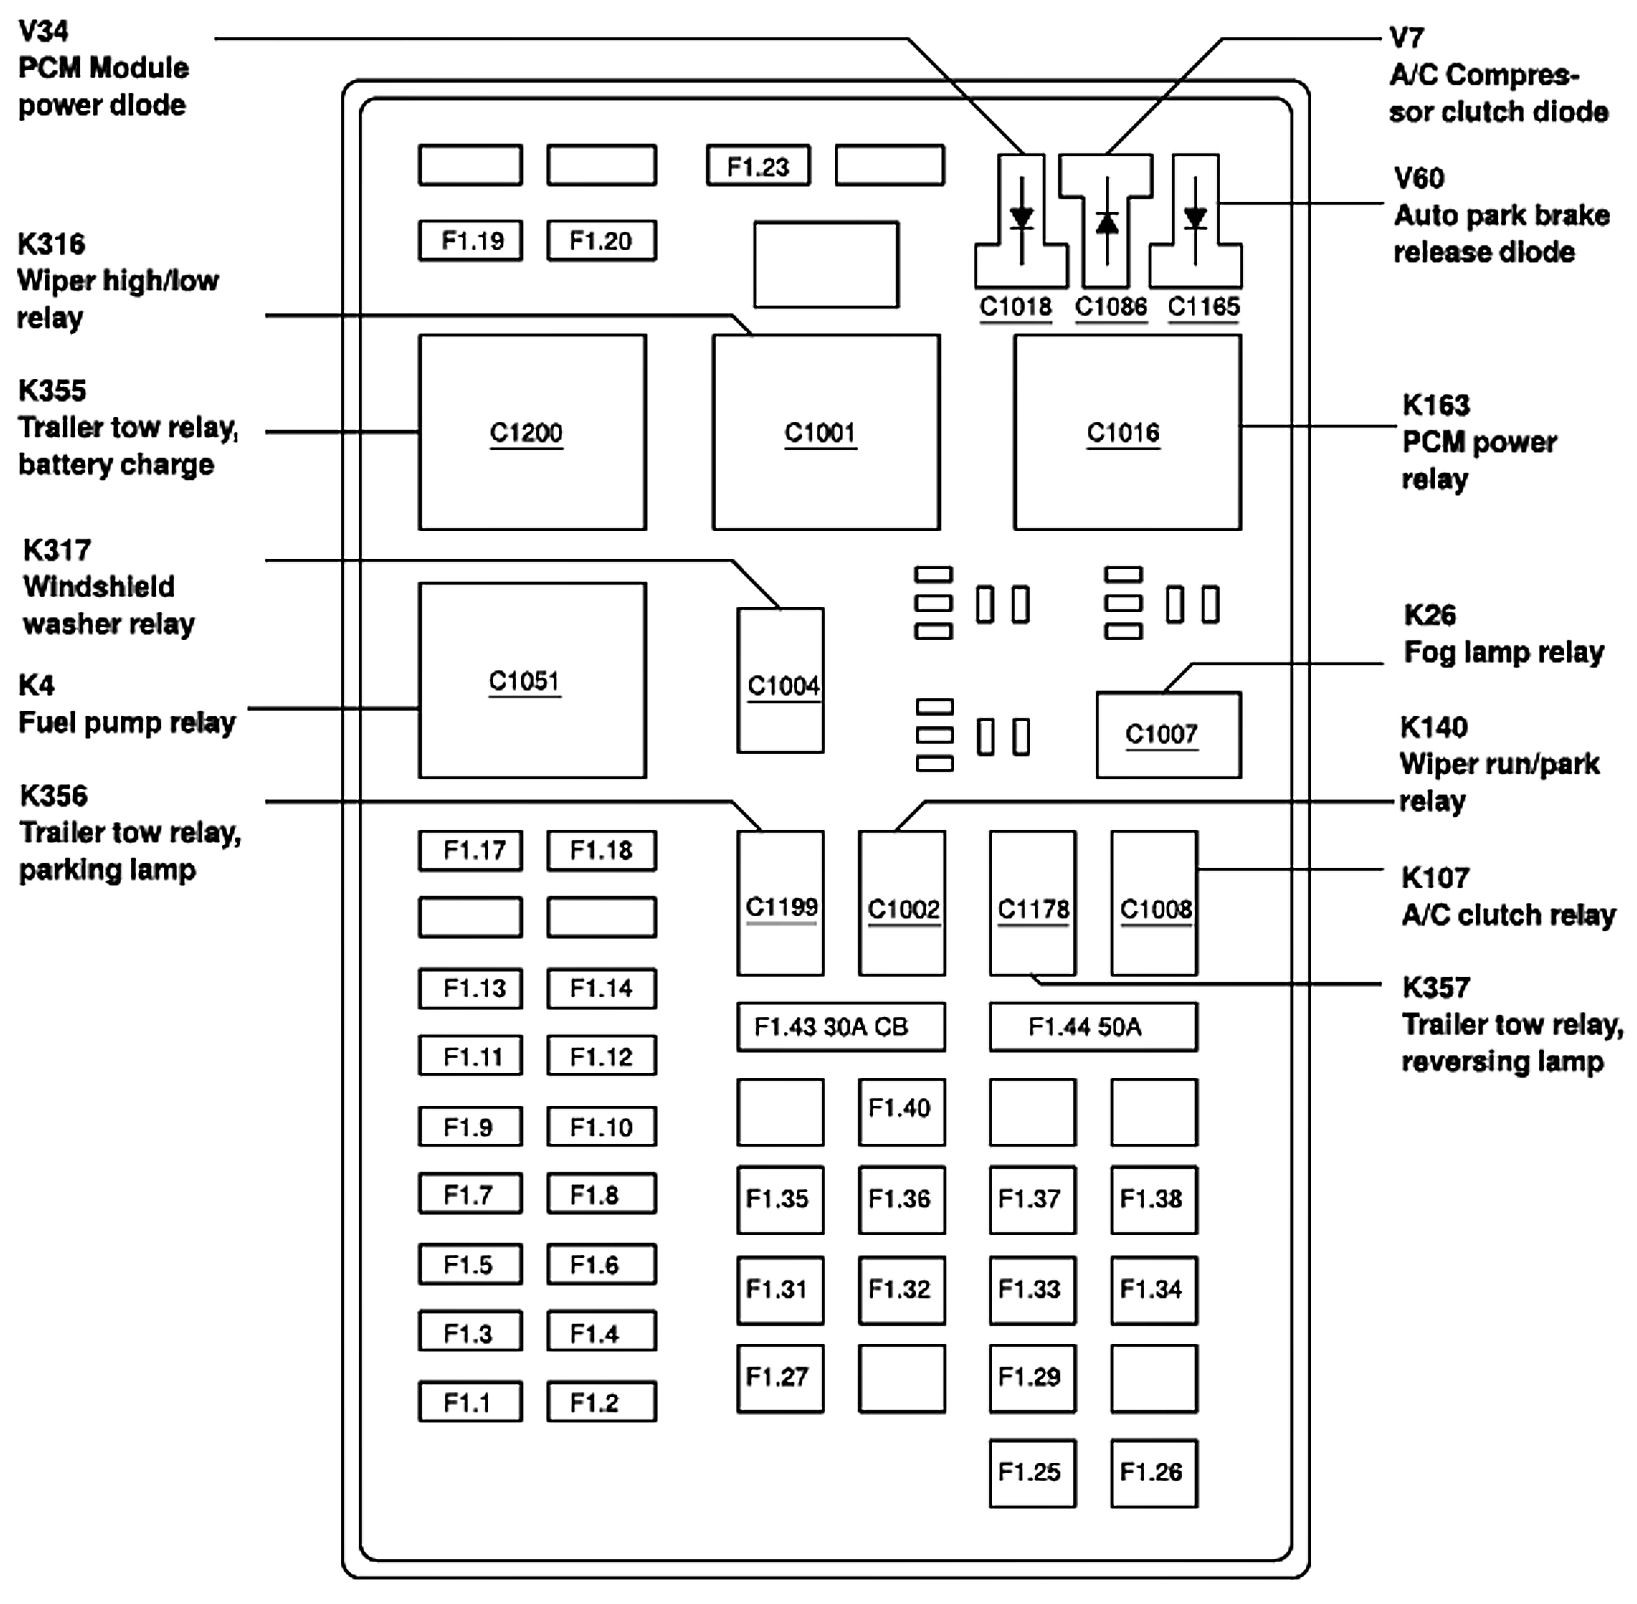 Fuse Box 2000 Lincoln Navigator Simple Guide About Wiring